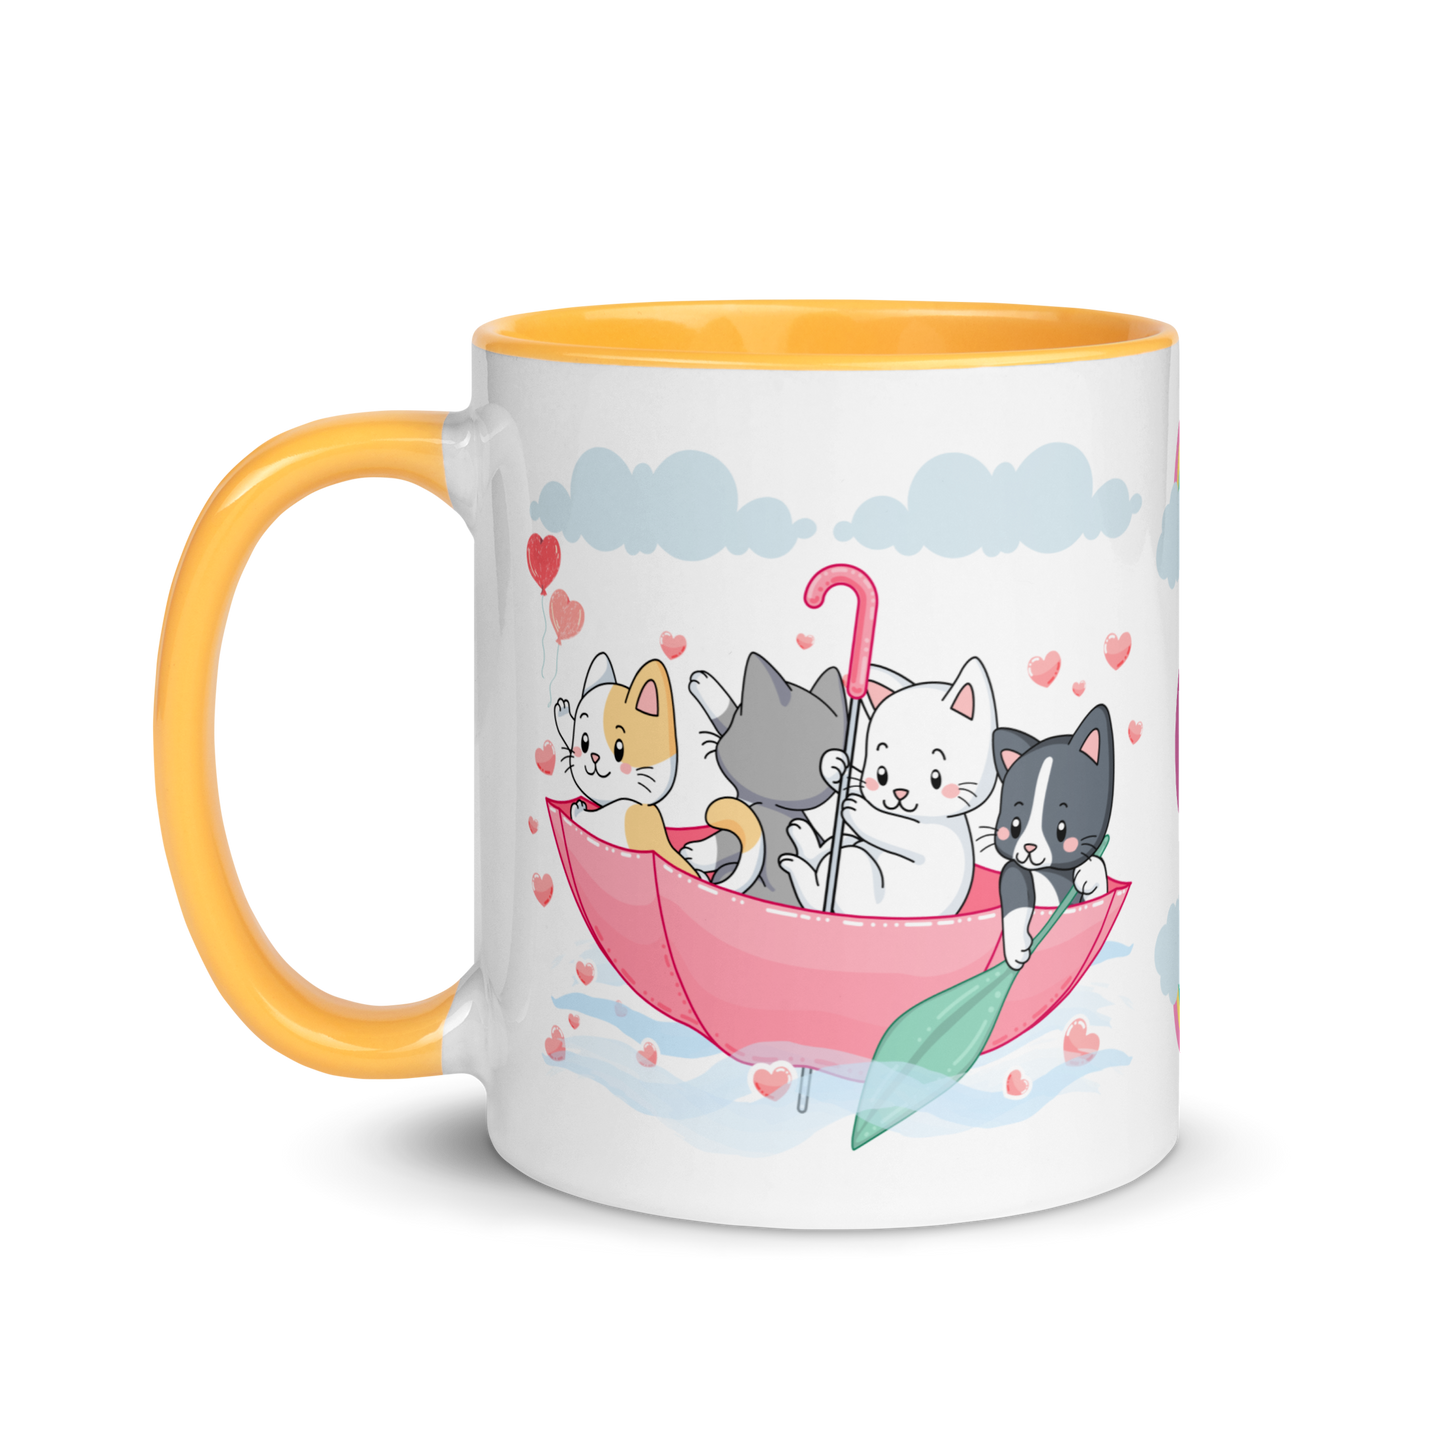 Monogramed Mug 11oz | Cats in the Umbrella Boat with Hearts